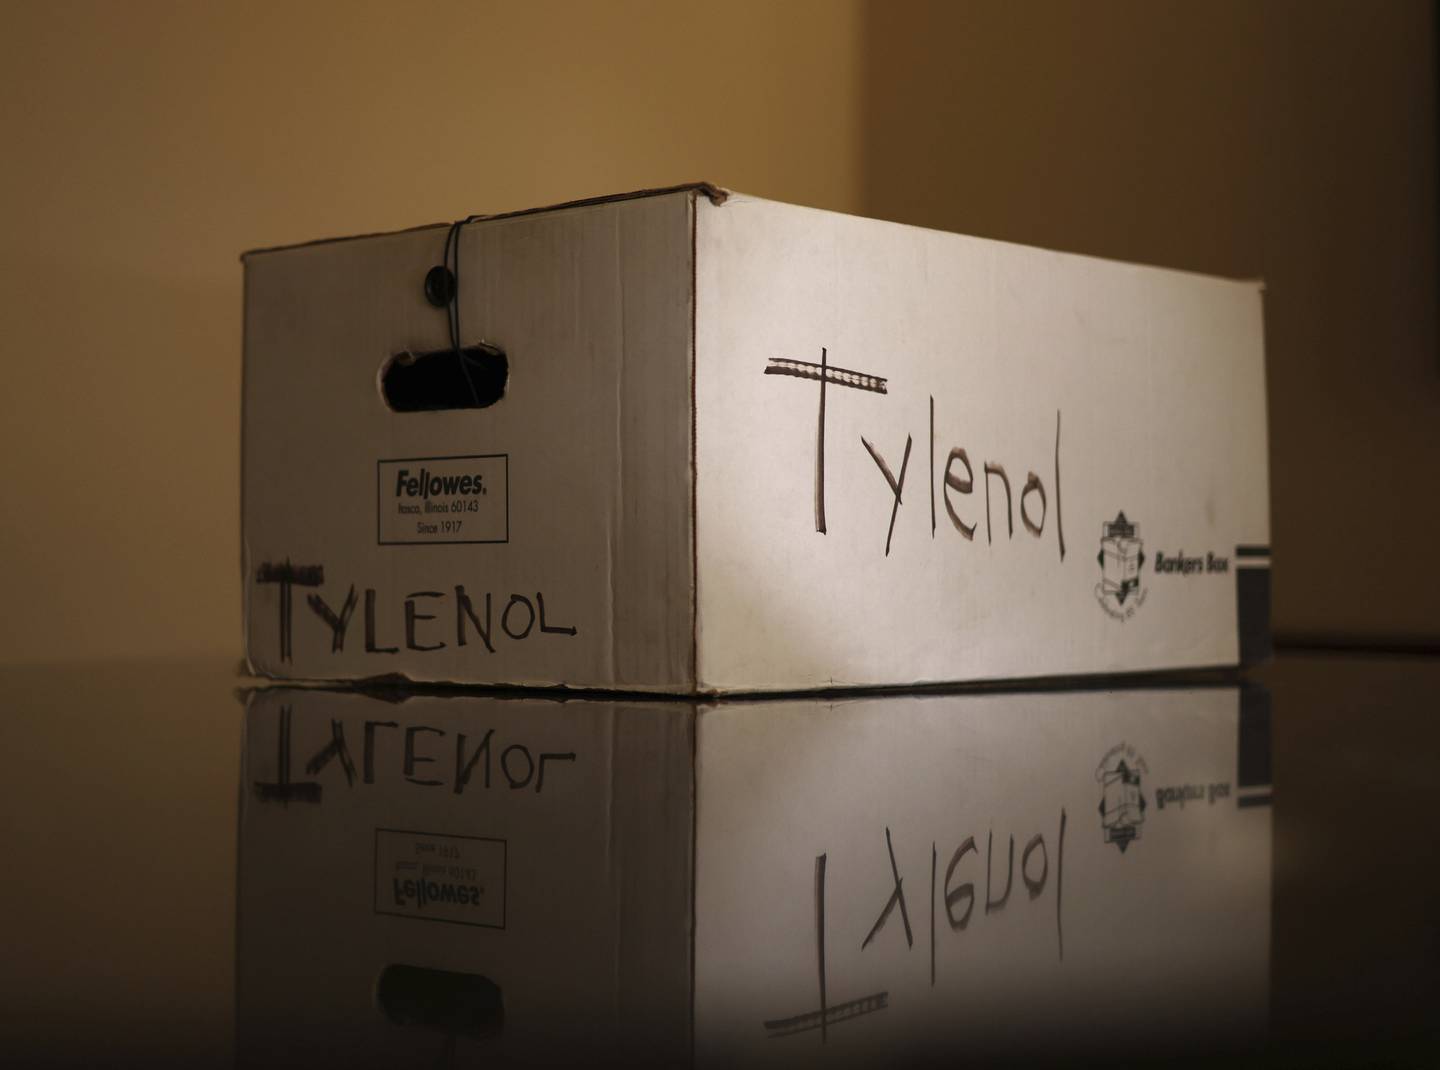 The law firm Corboy & Demetrio sued Johnson & Johnson in 1983 over the Tylenol poisonings. A box of documents was photographed this year at the firm's offices.